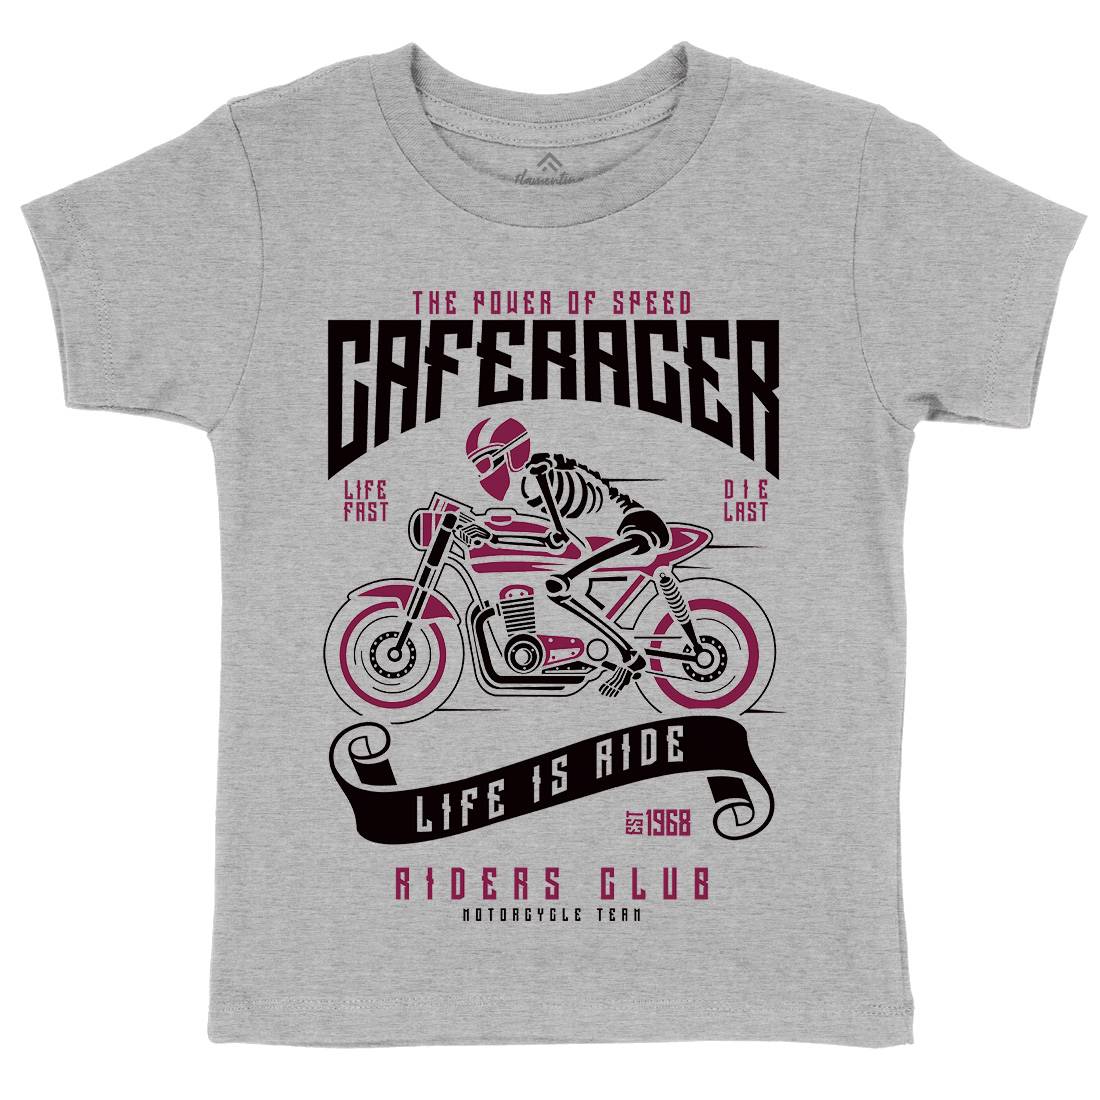 Speed Of Caferacer Kids Organic Crew Neck T-Shirt Motorcycles A154